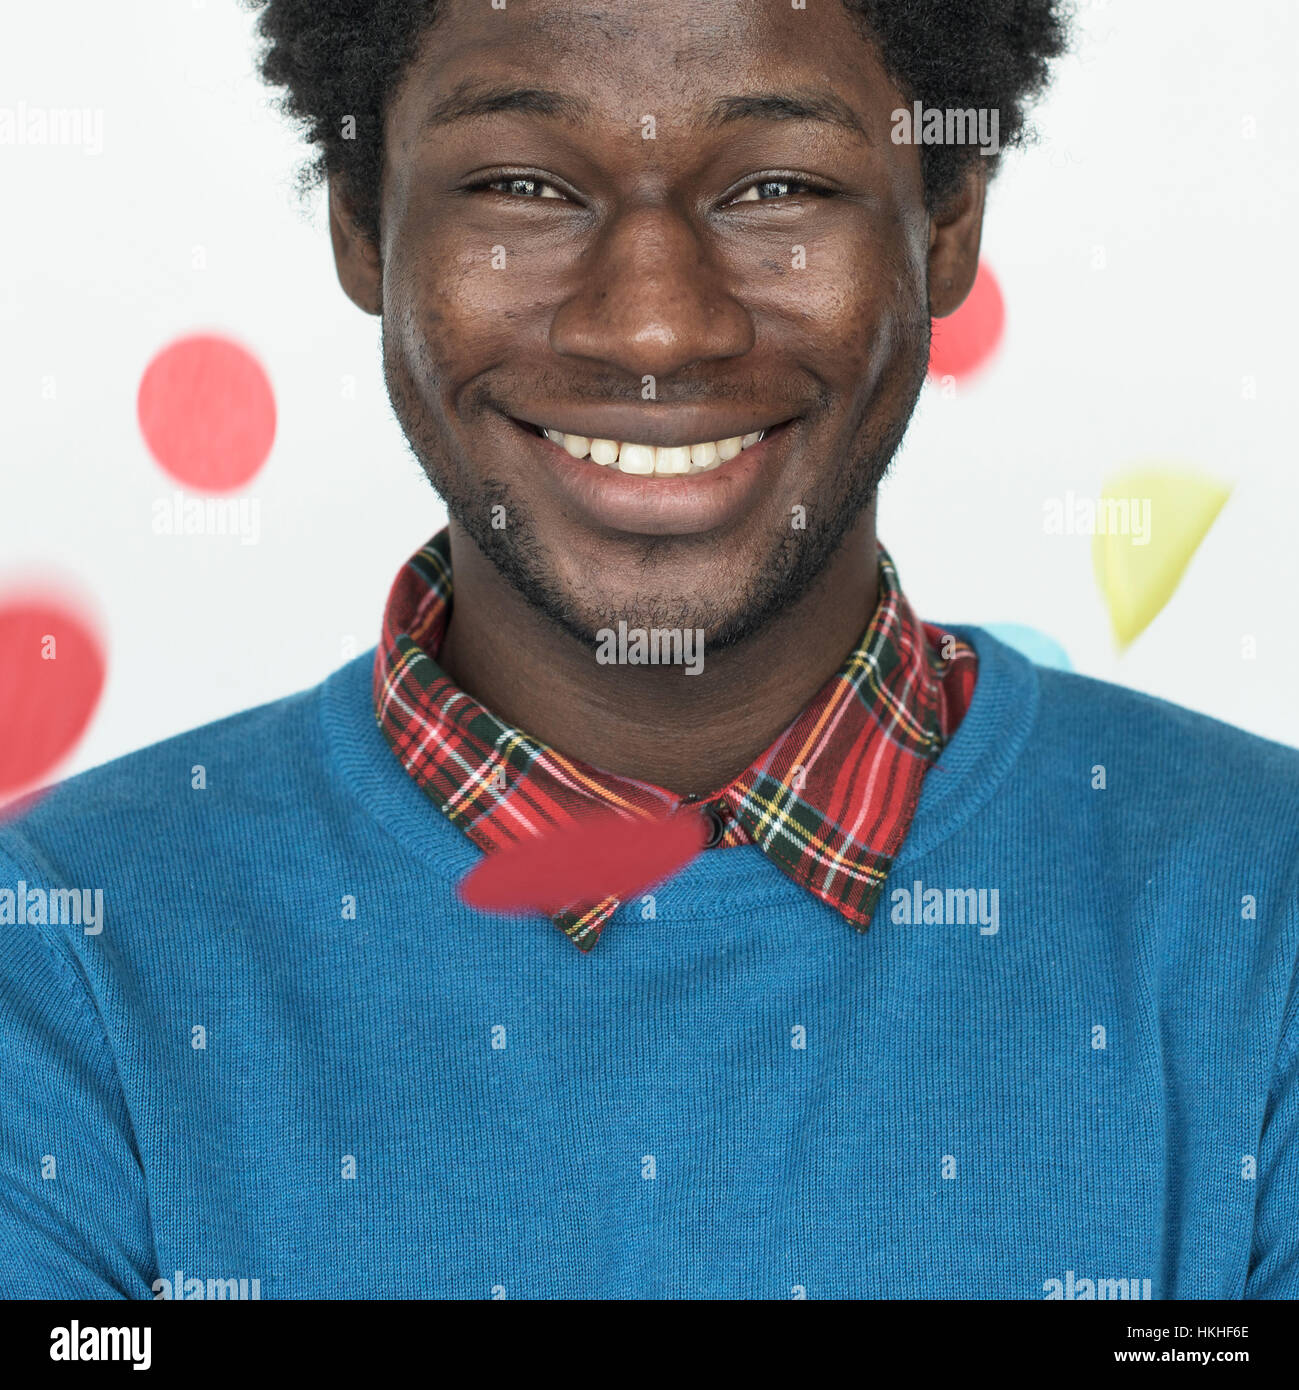 African American Celebrate Party Cheerful Concept Stock Photo